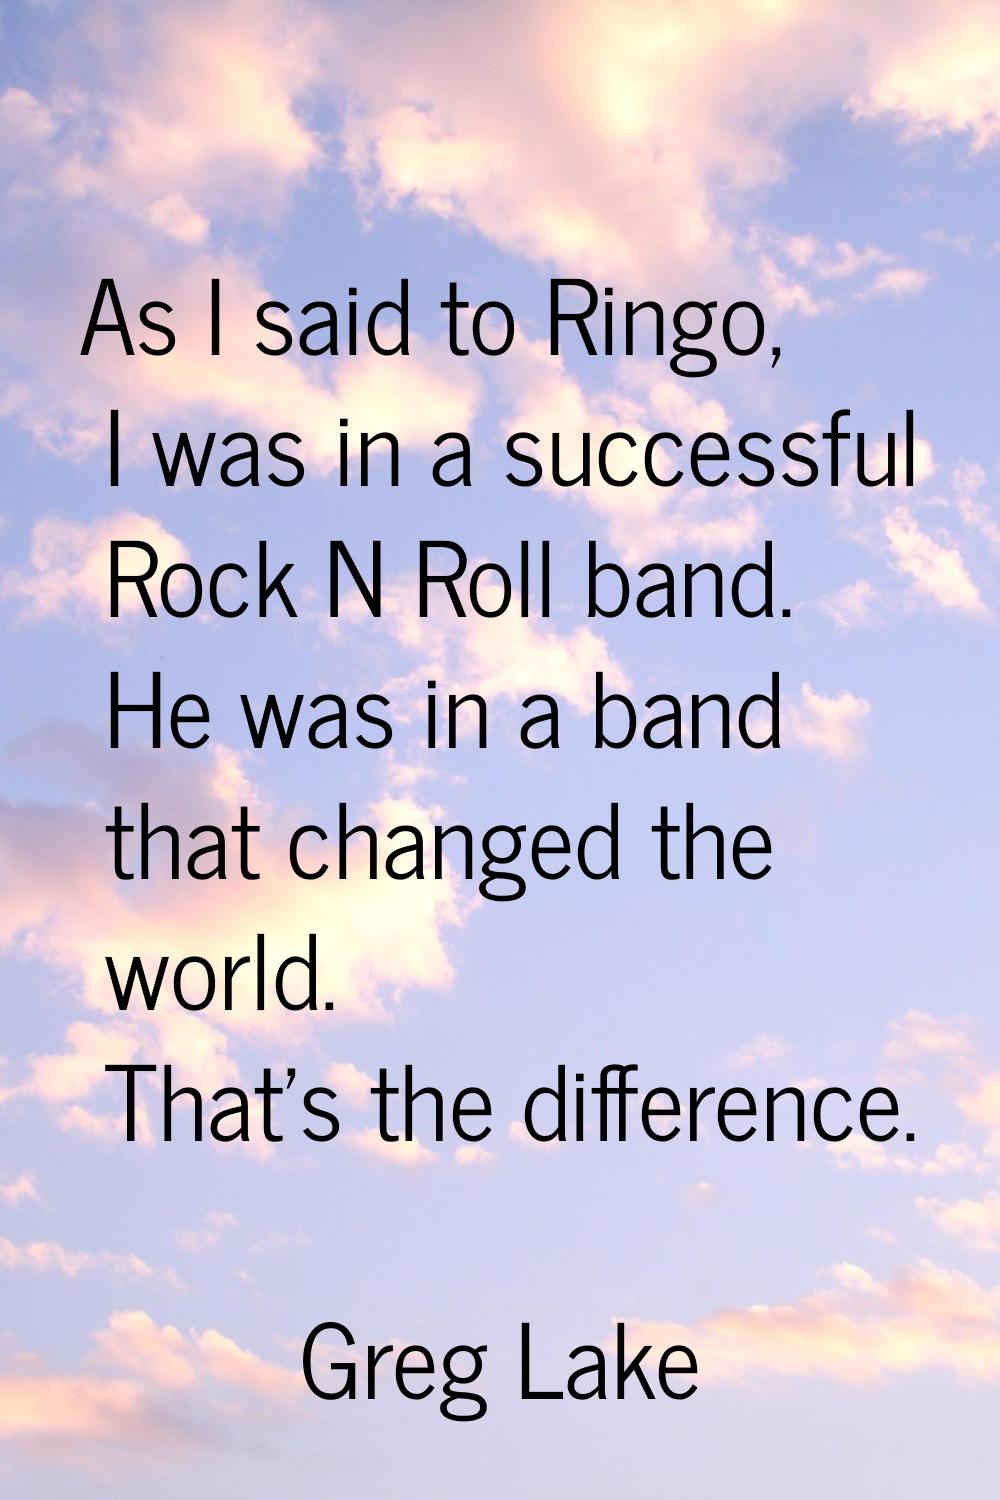 As I said to Ringo, I was in a successful Rock N Roll band. He was in a band that changed the world